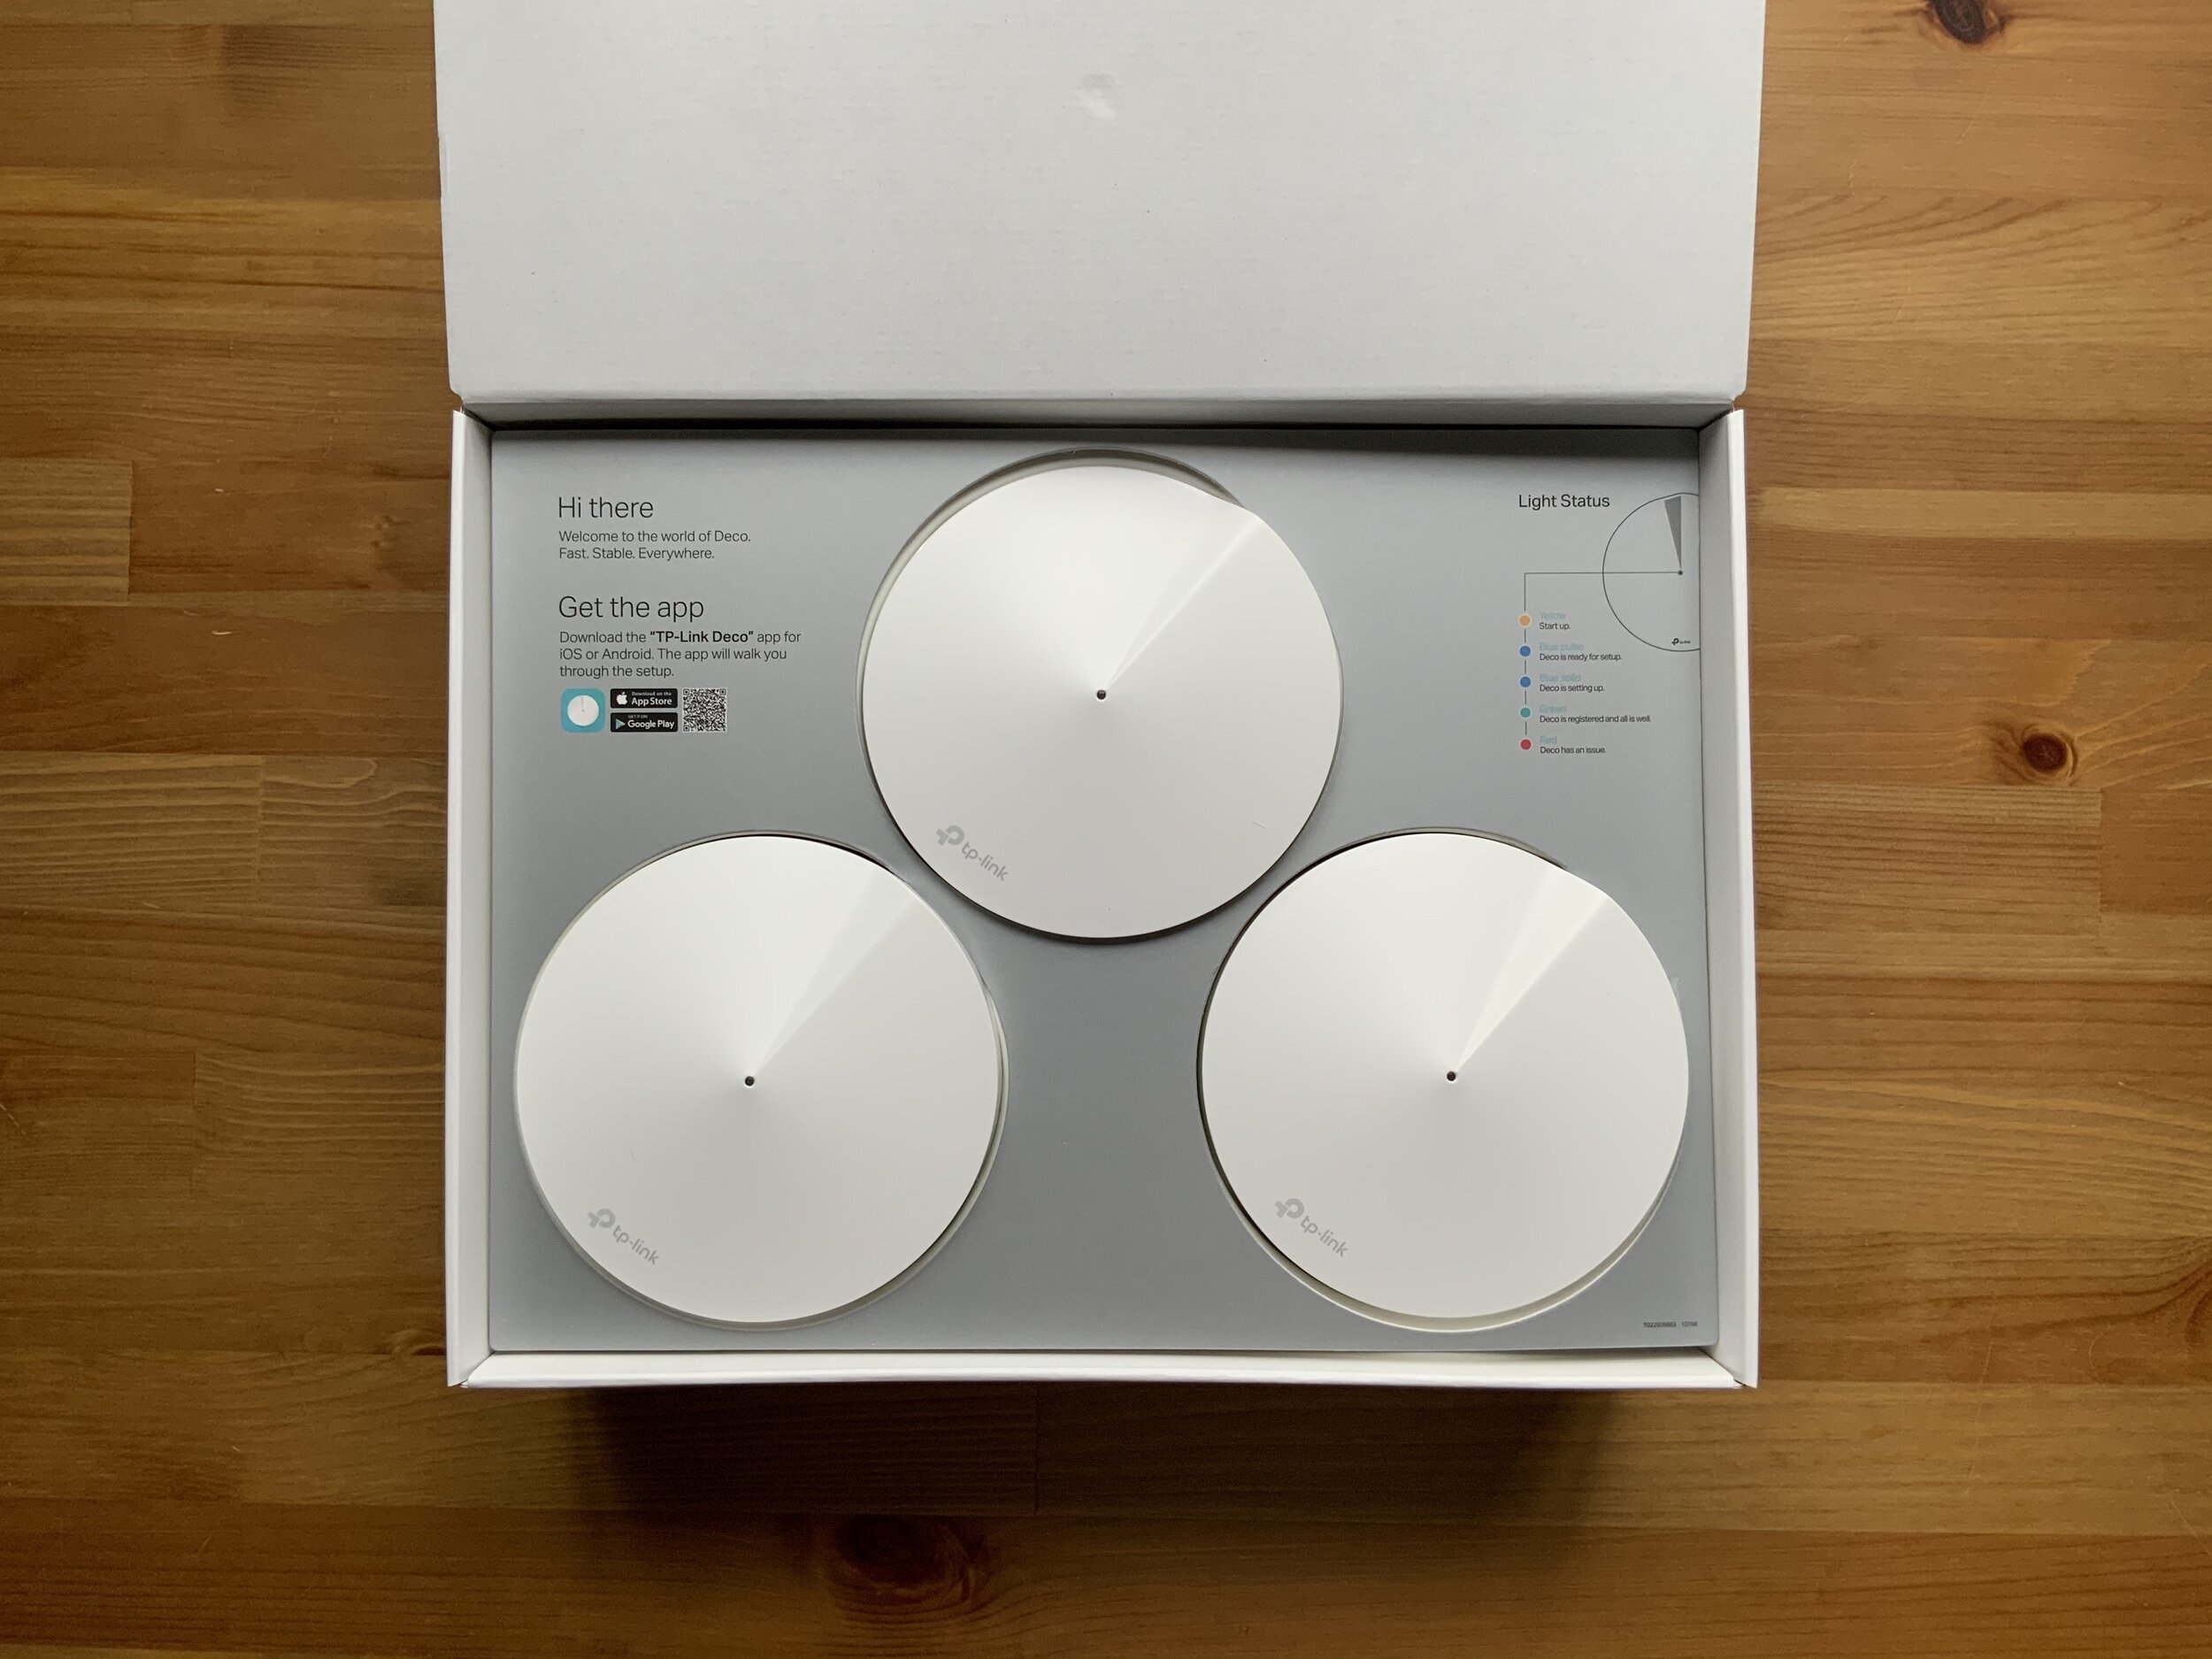 This is a 3-piece AC1200 mesh Wi-Fi kit